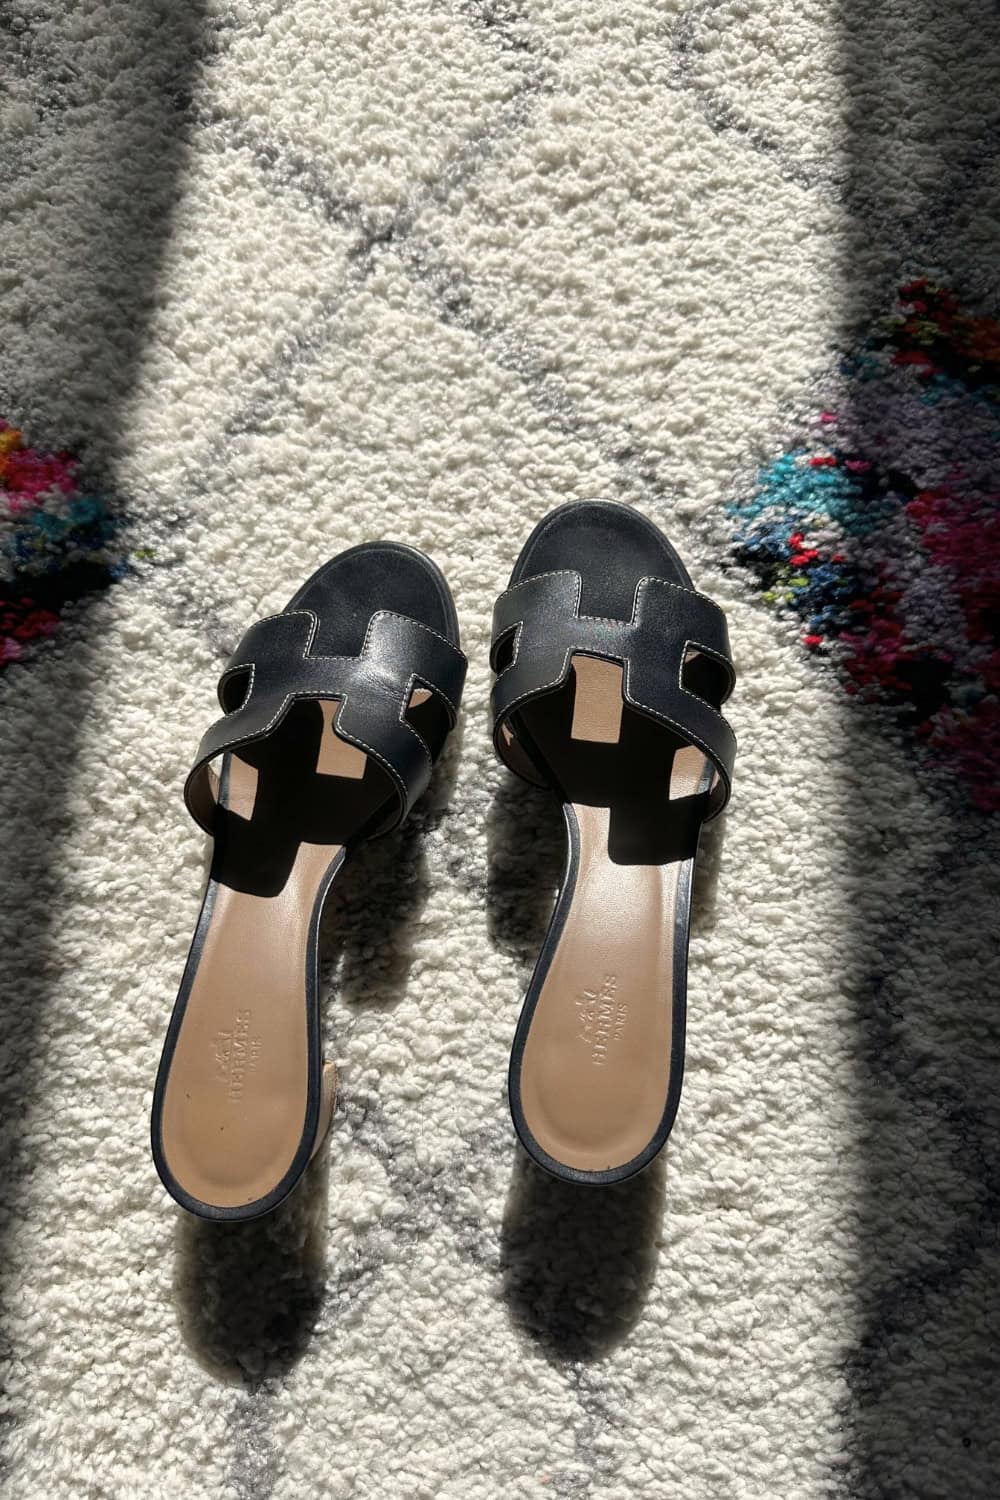 a pair of black sandals on a carpet